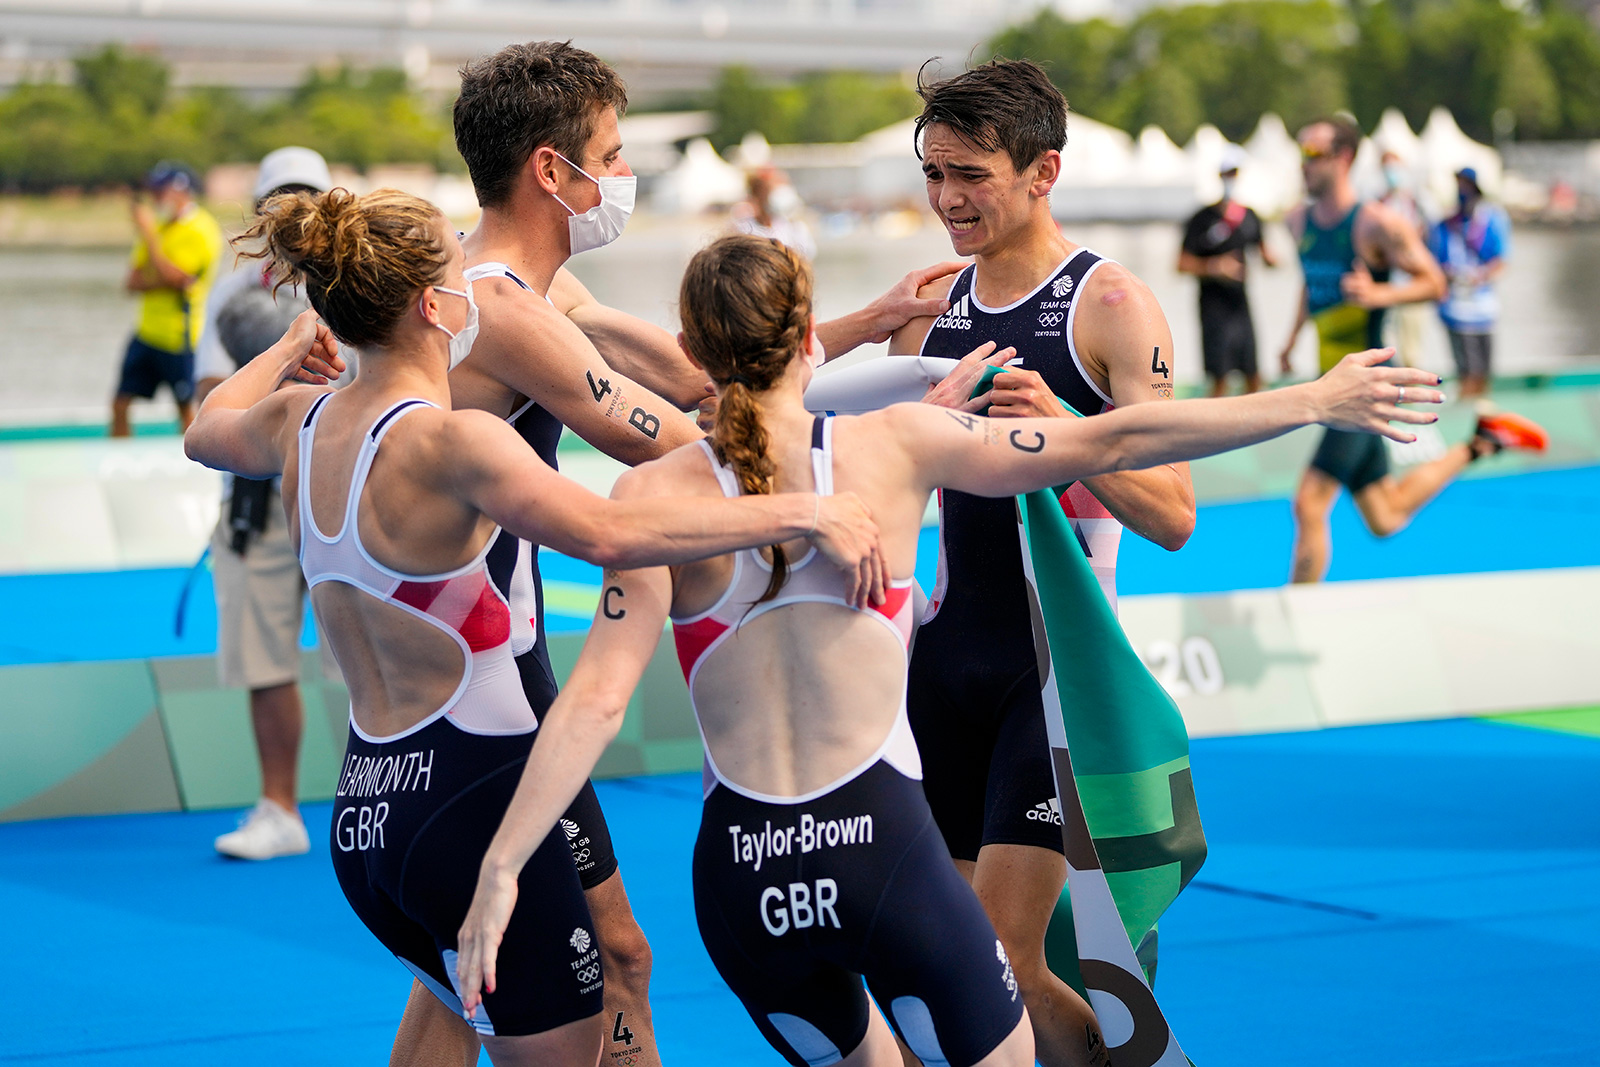 Alex Yee, Georgia Taylor-Brown, Jonny Brownlee, and Jessica Learmonth of Britain celebrate after winning the gold medal in the mixed relay triathlon on Saturday, July 31.